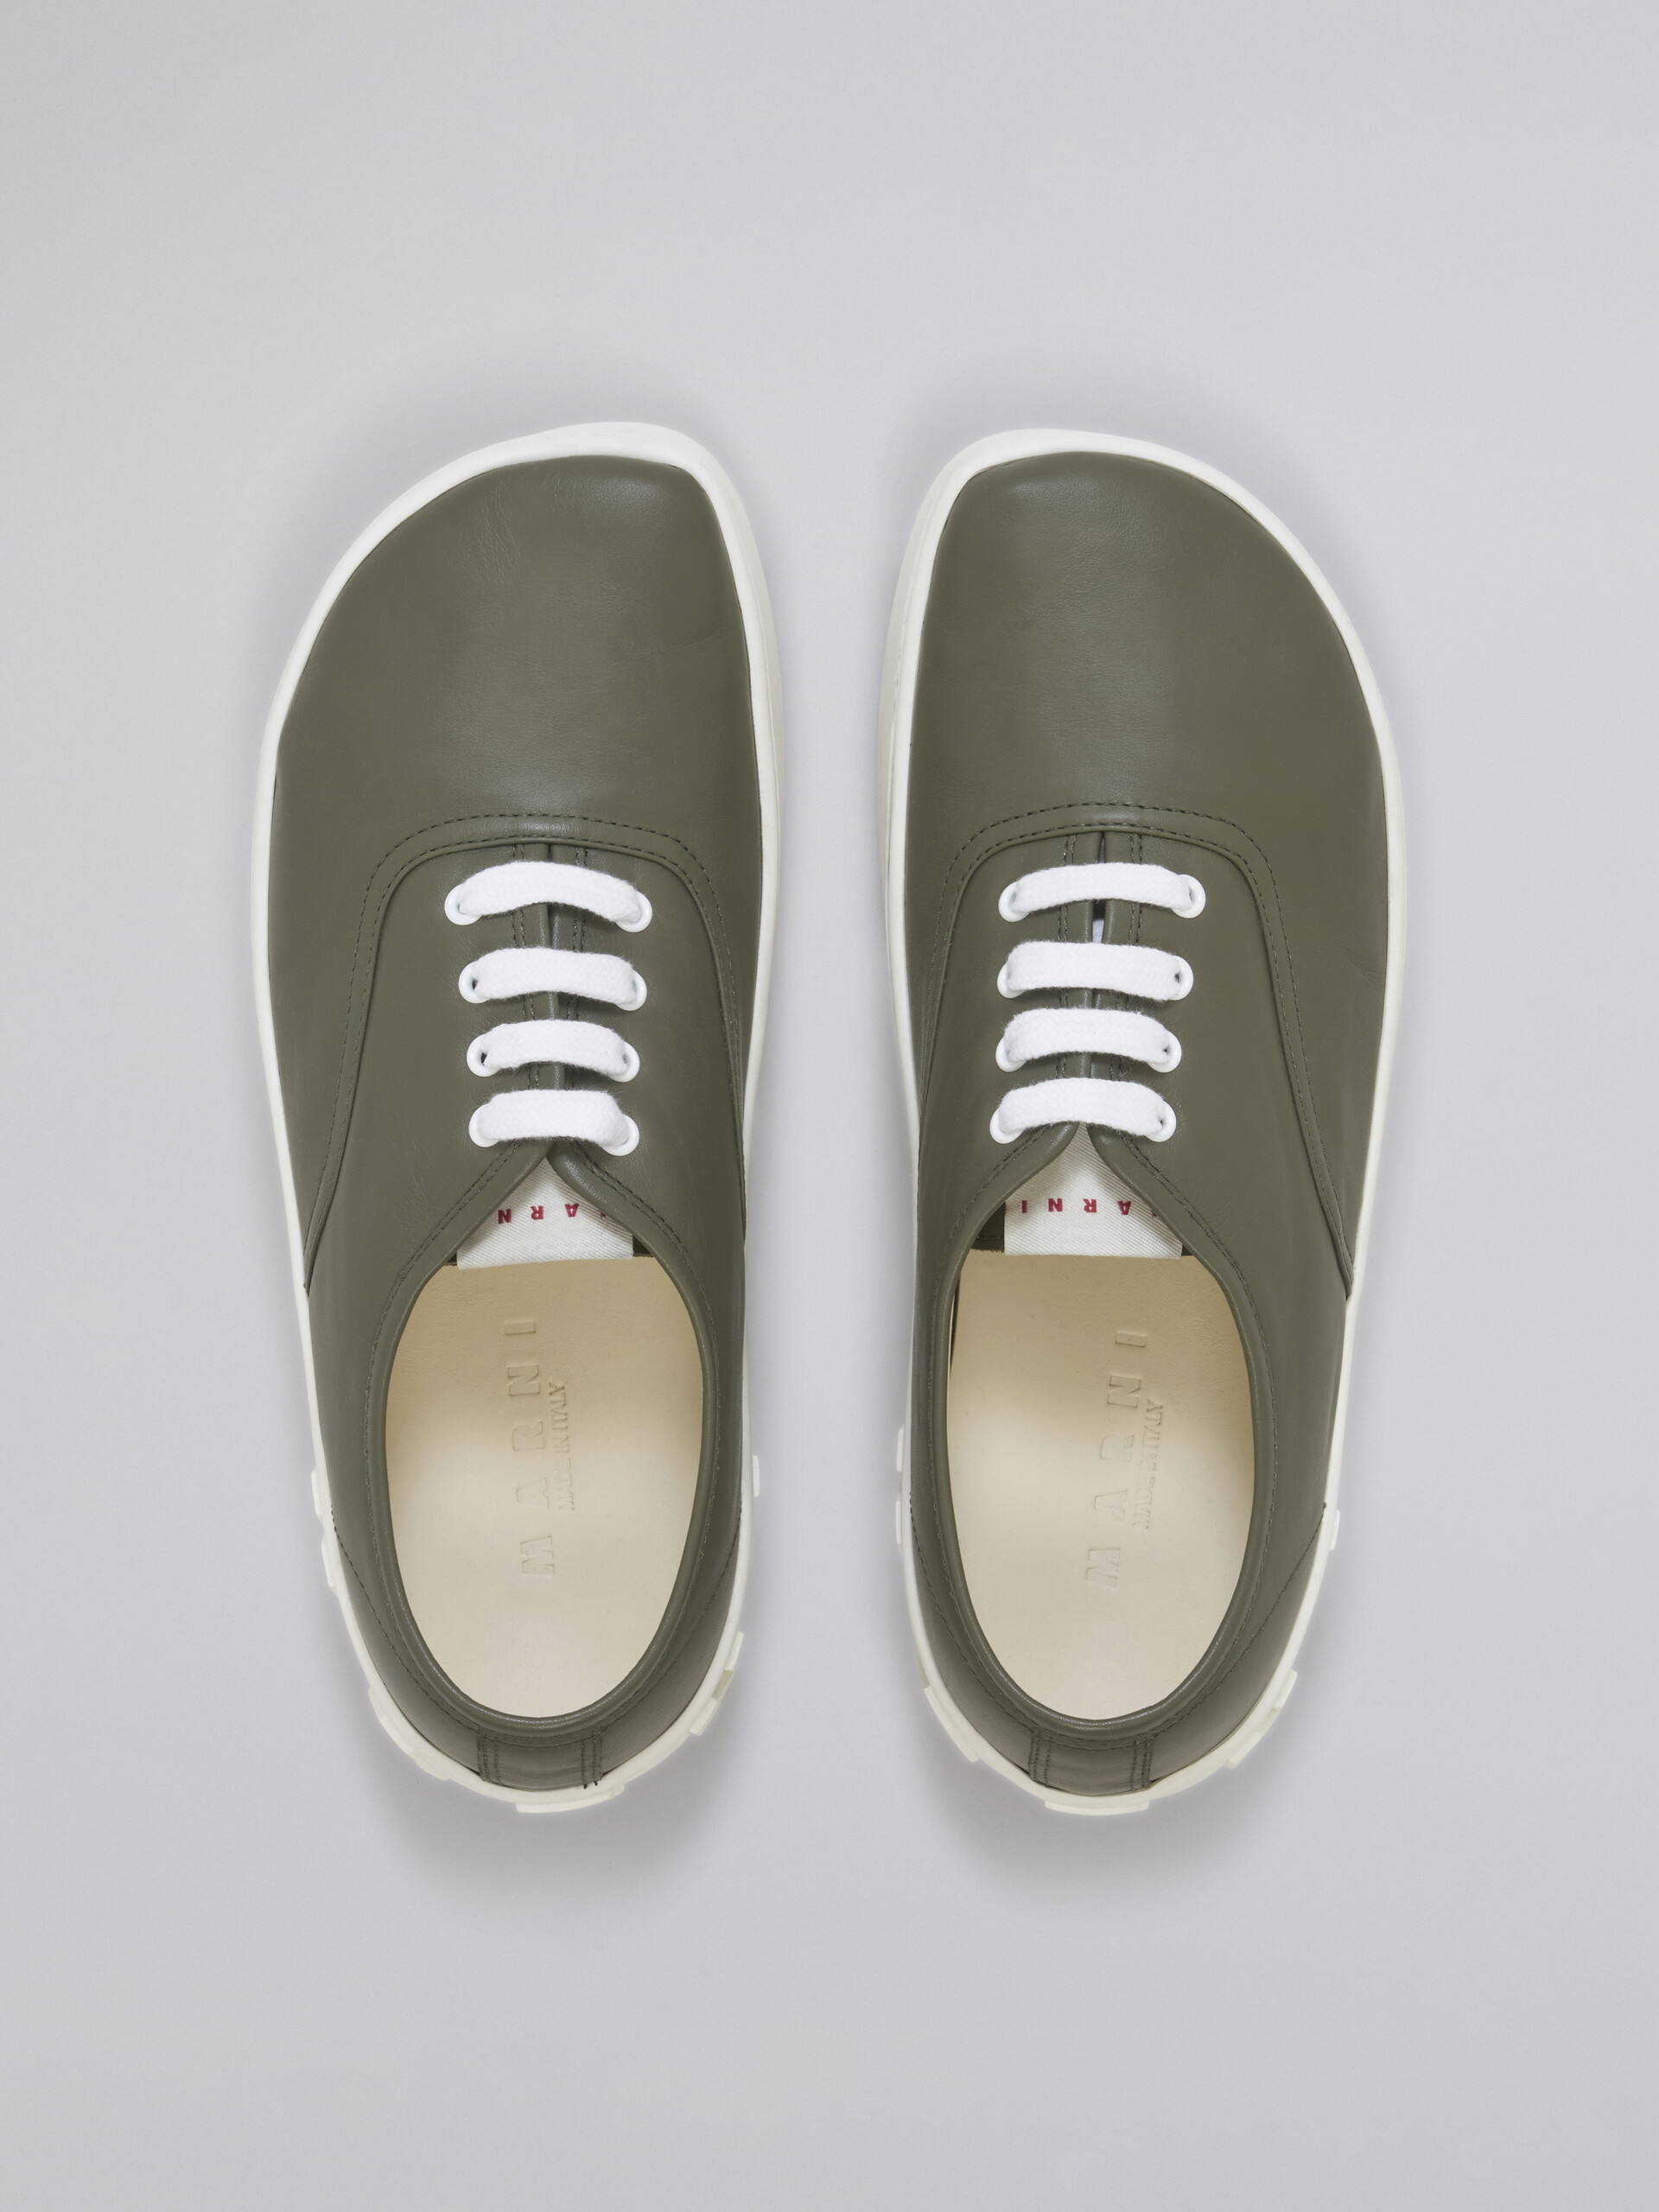 Green leather sneaker with maxi logo - Sneakers - Image 4